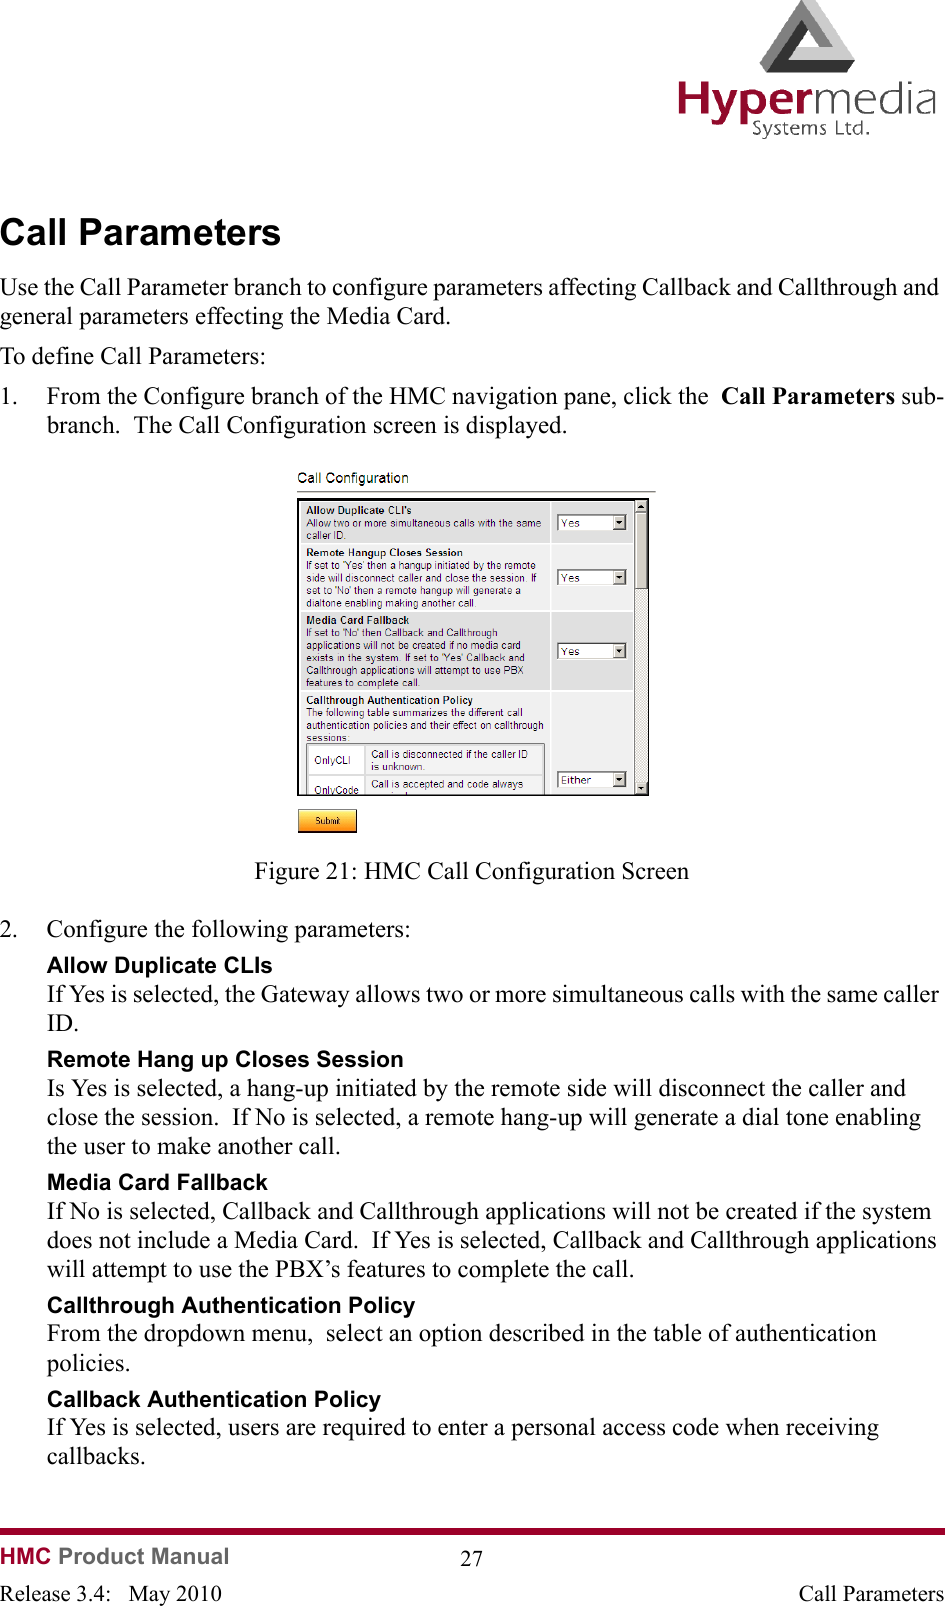 HMC Product Manual  27Release 3.4:   May 2010 Call ParametersCall ParametersUse the Call Parameter branch to configure parameters affecting Callback and Callthrough and general parameters effecting the Media Card.To define Call Parameters:1. From the Configure branch of the HMC navigation pane, click the  Call Parameters sub-branch.  The Call Configuration screen is displayed.              Figure 21: HMC Call Configuration Screen2. Configure the following parameters:Allow Duplicate CLIsIf Yes is selected, the Gateway allows two or more simultaneous calls with the same caller ID.Remote Hang up Closes SessionIs Yes is selected, a hang-up initiated by the remote side will disconnect the caller and close the session.  If No is selected, a remote hang-up will generate a dial tone enabling the user to make another call.Media Card FallbackIf No is selected, Callback and Callthrough applications will not be created if the system does not include a Media Card.  If Yes is selected, Callback and Callthrough applications will attempt to use the PBX’s features to complete the call.Callthrough Authentication PolicyFrom the dropdown menu,  select an option described in the table of authentication policies.Callback Authentication Policy If Yes is selected, users are required to enter a personal access code when receiving callbacks.